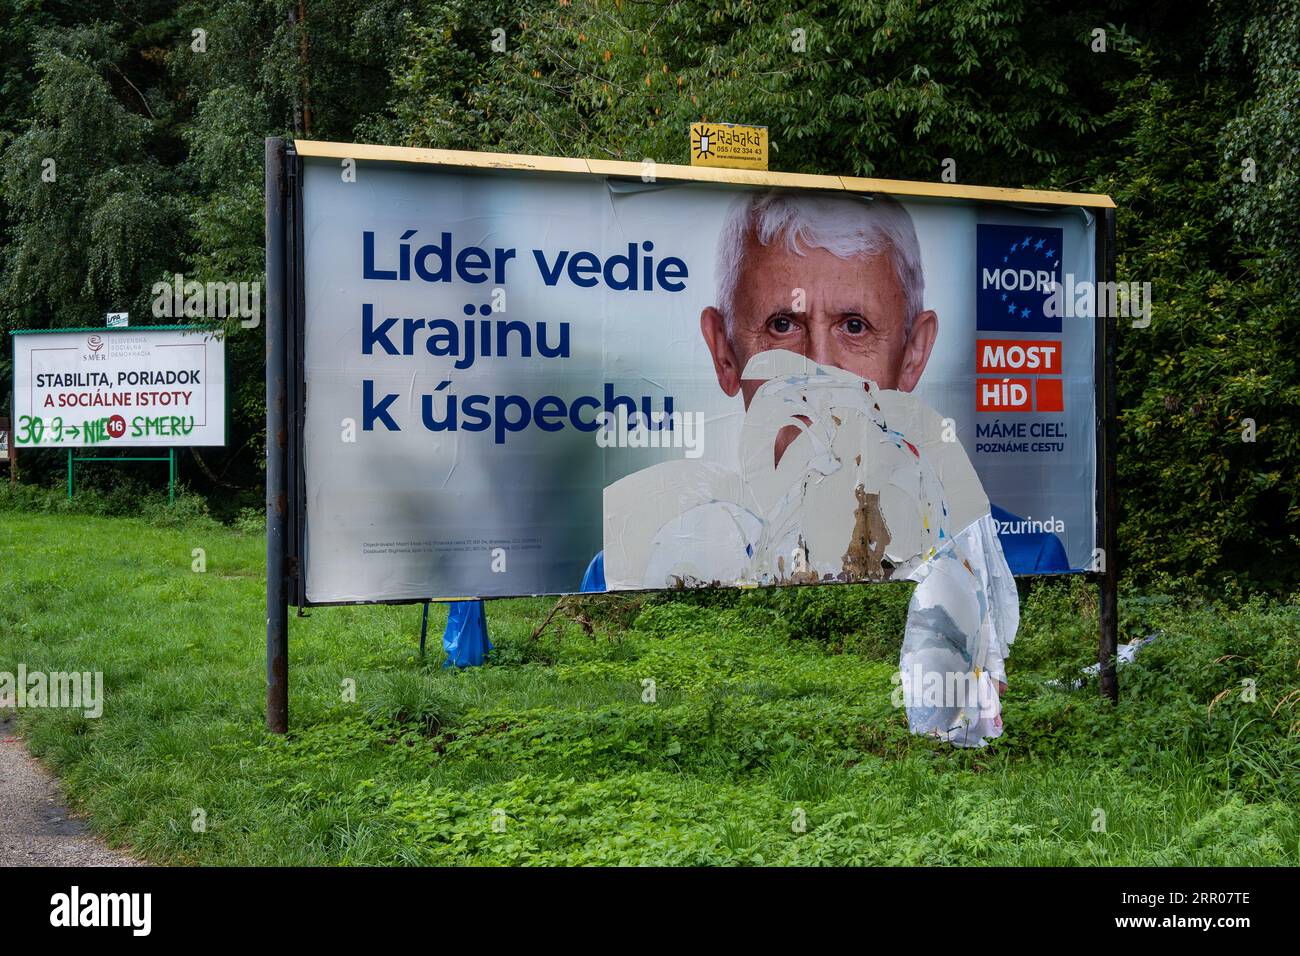 Sutovo, Slovakia. 29th Aug, 2023. The election billboard for the Modri Most-Hid party displays the face of the leader of the party and former prime minister Mikulas Dzurinda (right) and the election billboard for Smer party (left), which is lead by former prime minister Robert Fico in the street in Sutovo. Slovakia will hold its parliament elections on September 30, 2023. According to current election polls, winner of election would be Smer party with election leader Robert Fico, former prime minister, followed by liberal party Progresivne Slovensko with leader Michal Simecka, Vice-President Stock Photo